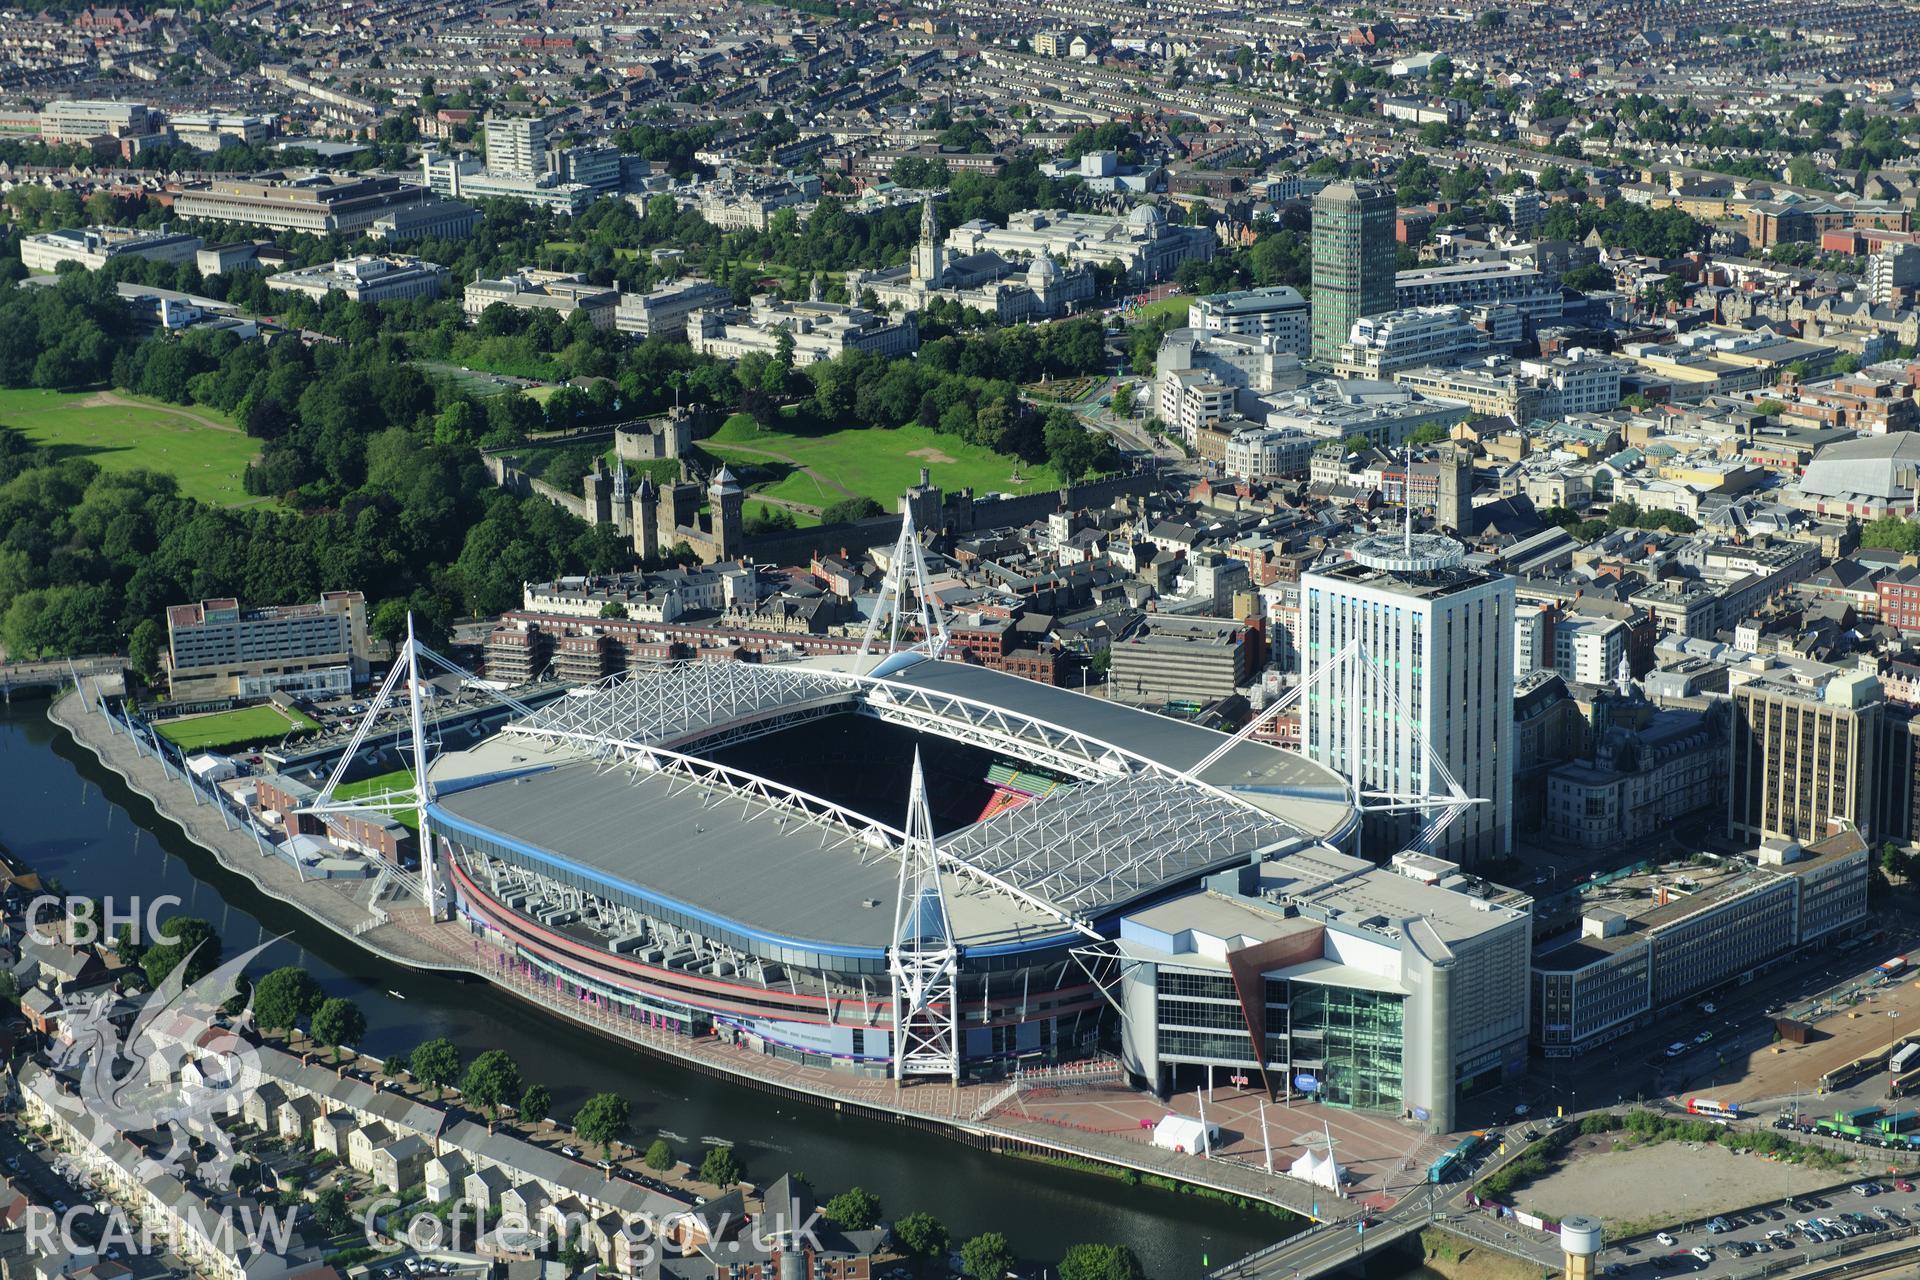 RCAHMW colour oblique photograph of Cardiff Millennium Stadium. Taken by Toby Driver on 24/07/2012.